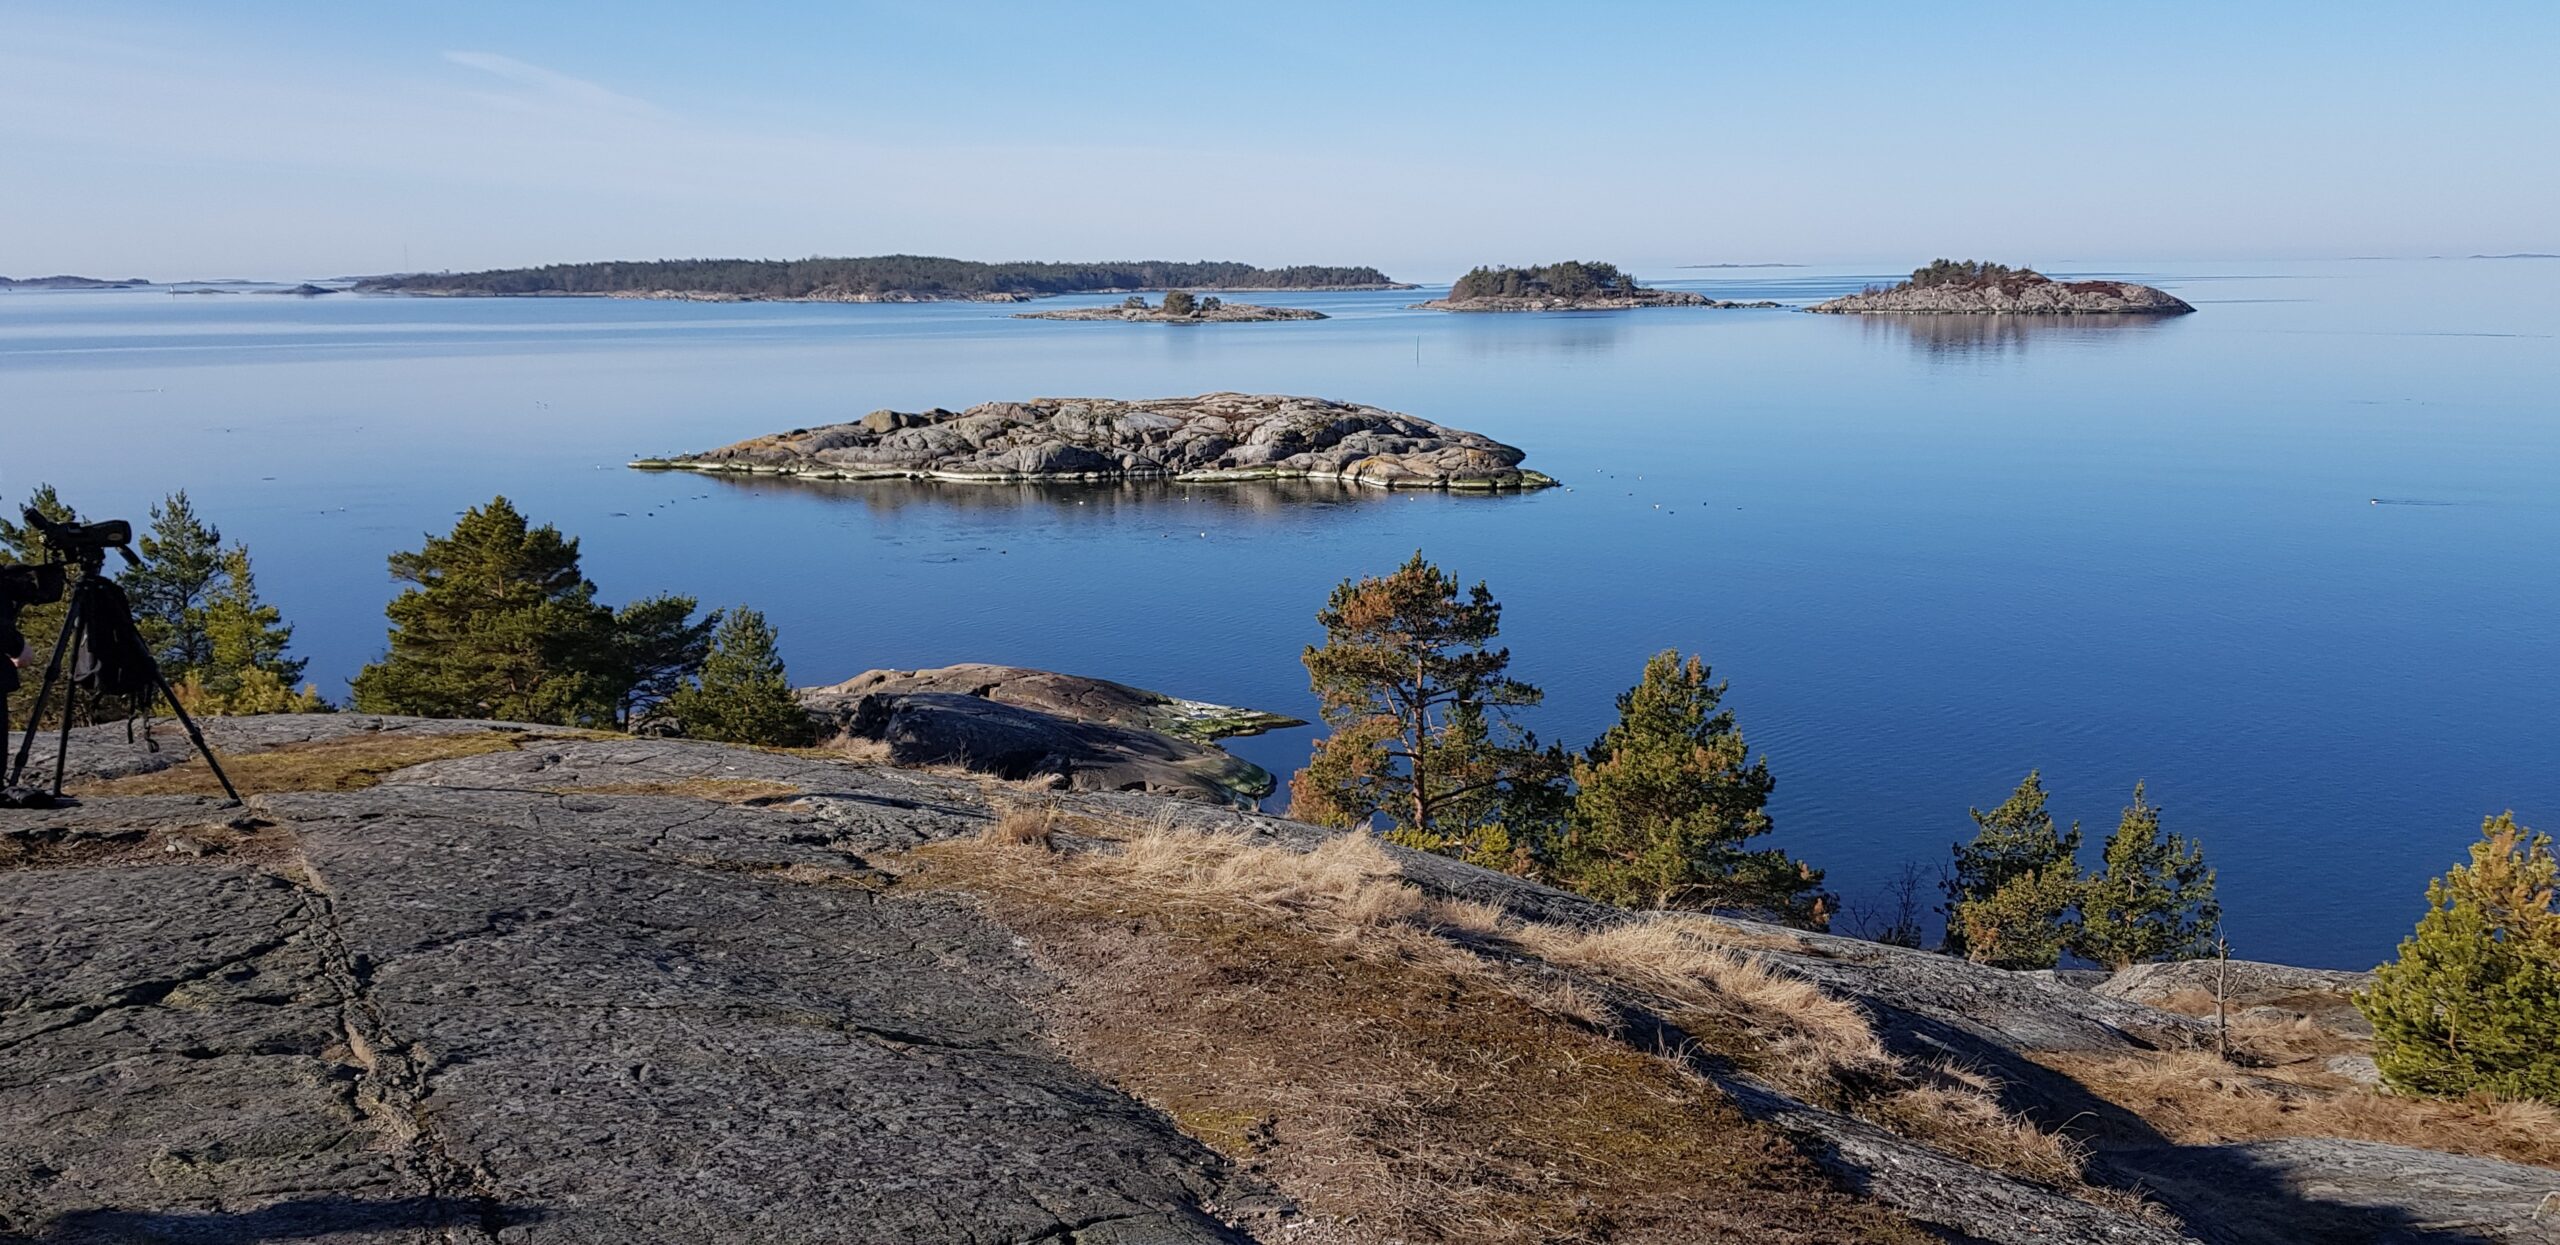 View to the Finnish Archipelago - famous spot for observating migratory birds